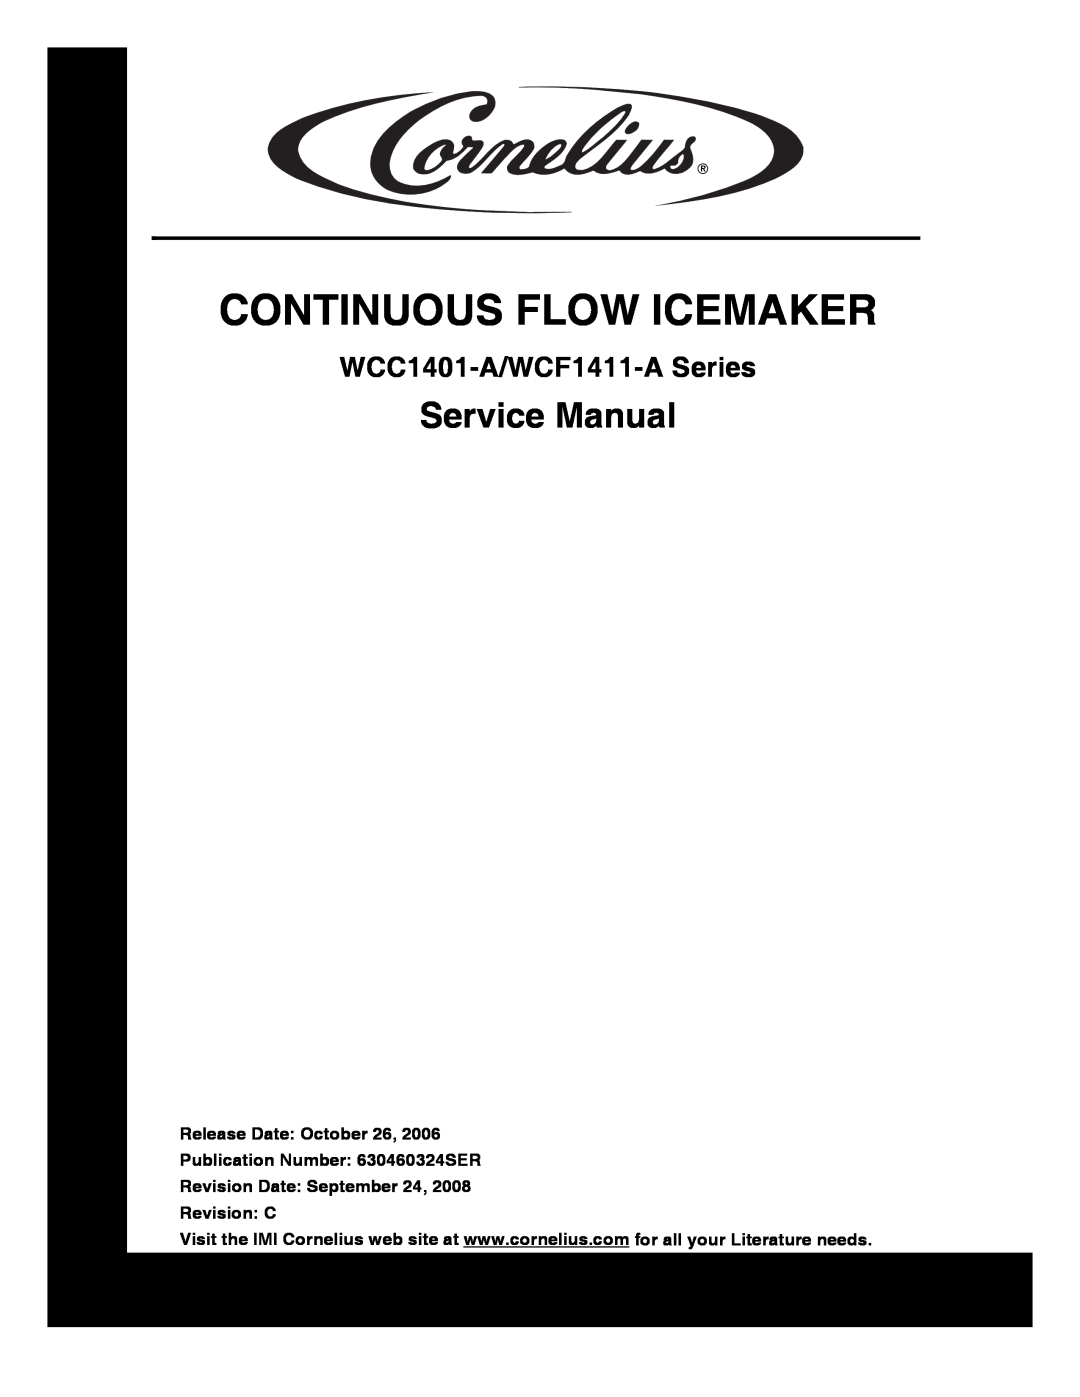 Cornelius service manual Service Manual, Continuous Flow Icemaker, WCC1401-A/WCF1411-ASeries 